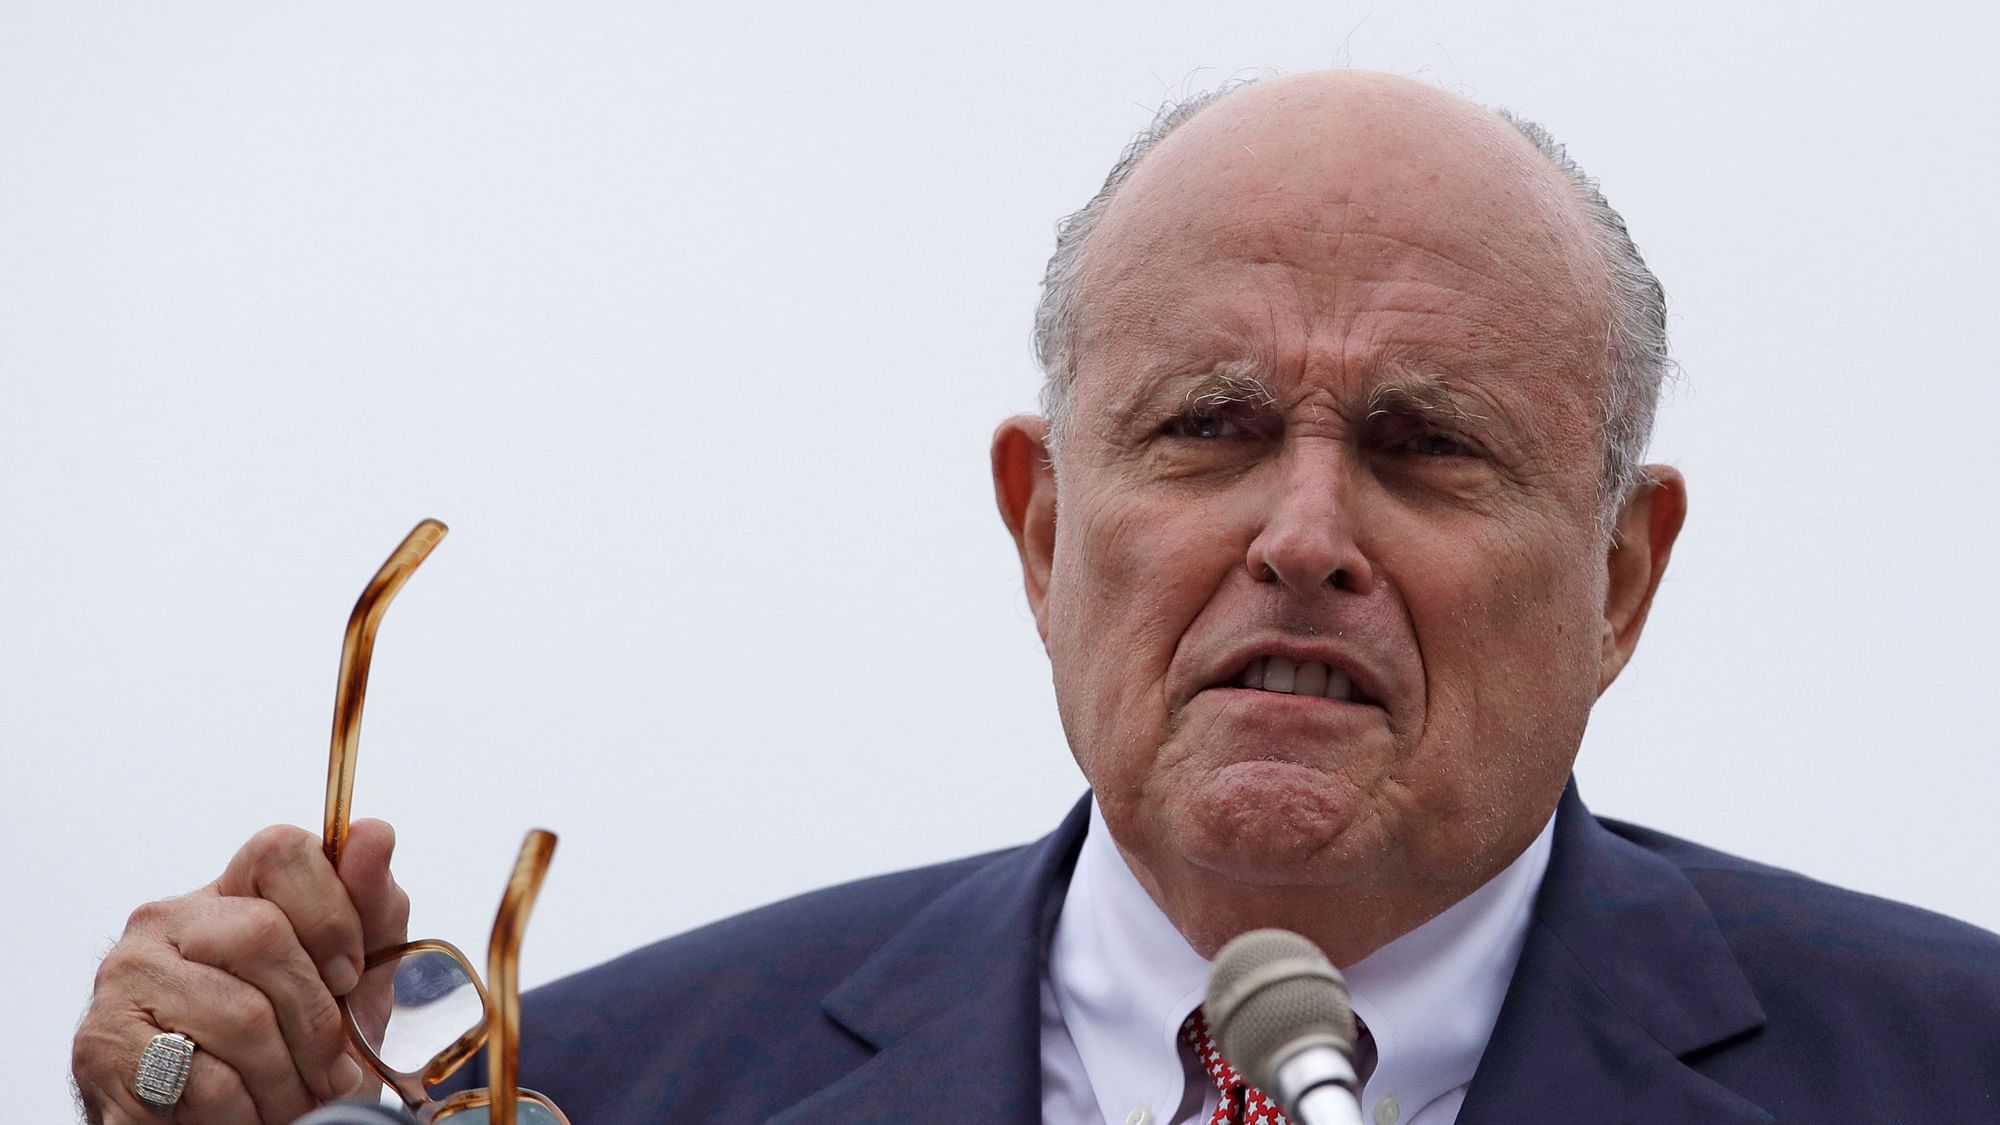 Donald Trump’s lawyer Rudy Giuliani (above) called the Trump campaign’s effort to get political help from representatives of the Russian government possibly ill-advised but not illegal.